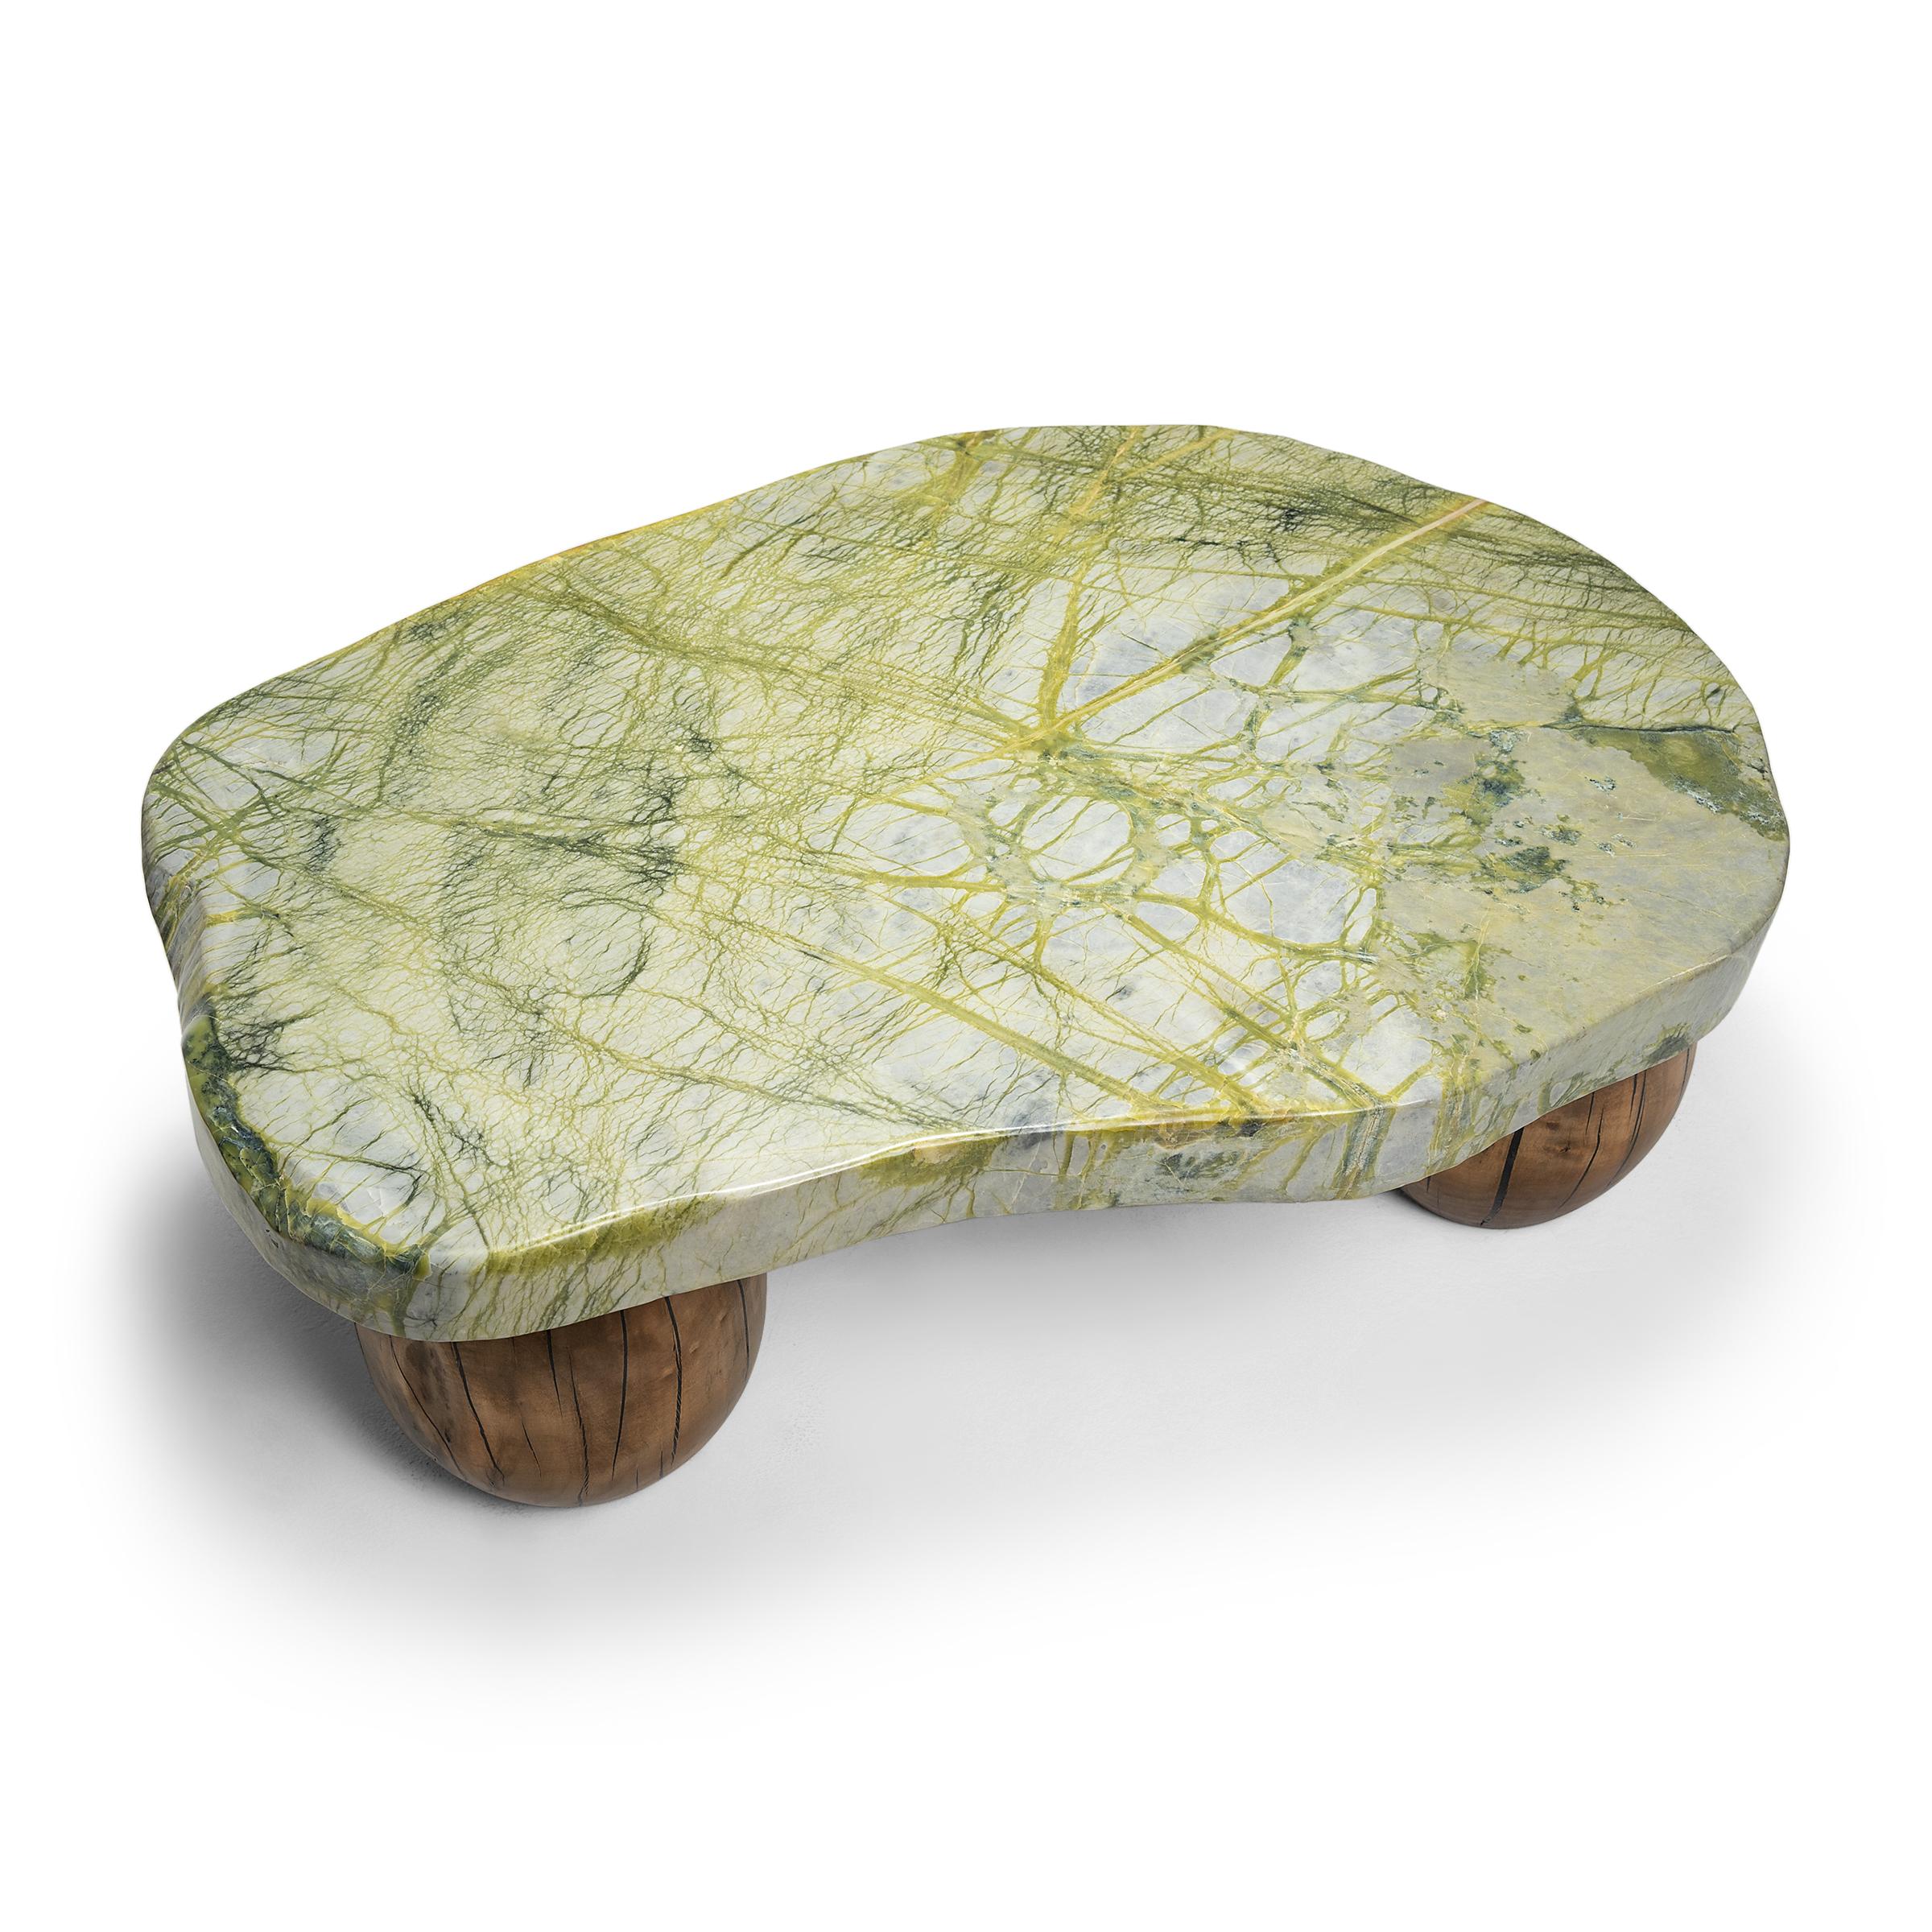 Greenery stones are named for the naturally occurring patterns suggestive of trees, grass and other plantlike forms that result from the stone’s conglomerate mix of jadeite, moss agate, serpentine, and other minerals. Found in China’s Liaoning